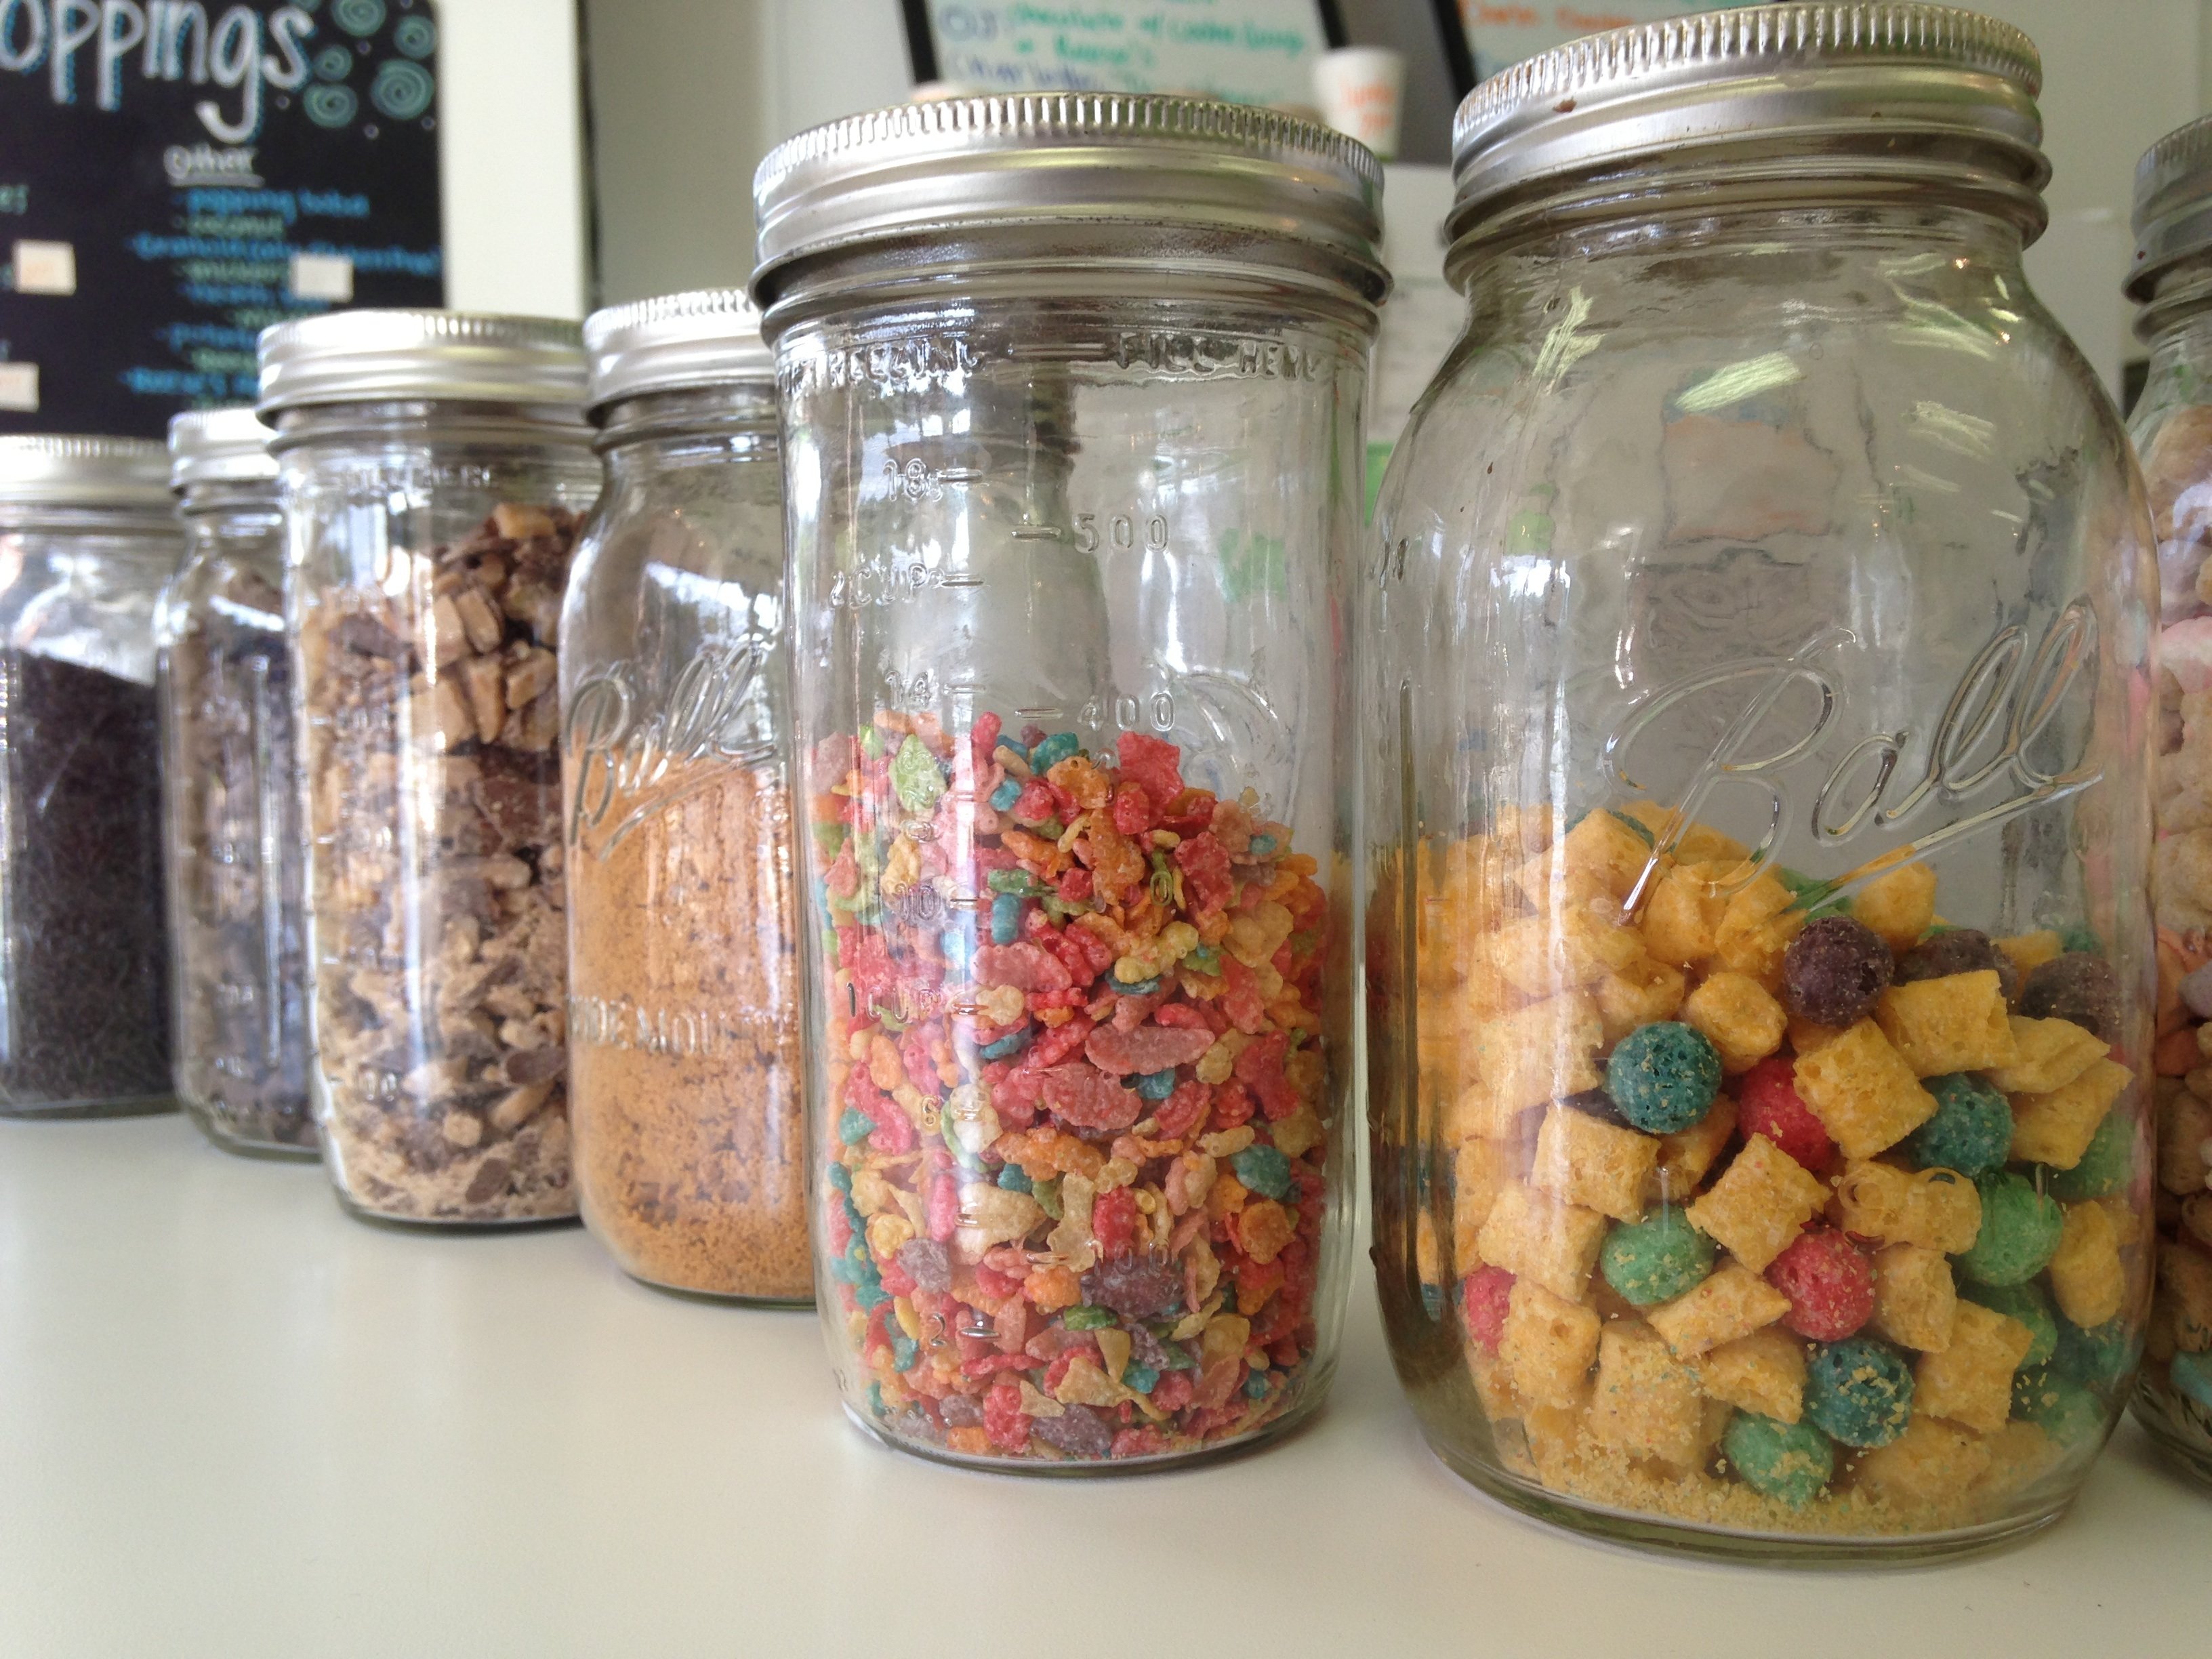 Five Easy Steps to Help You Organize Your Pantry - Accidental Hipster Mum